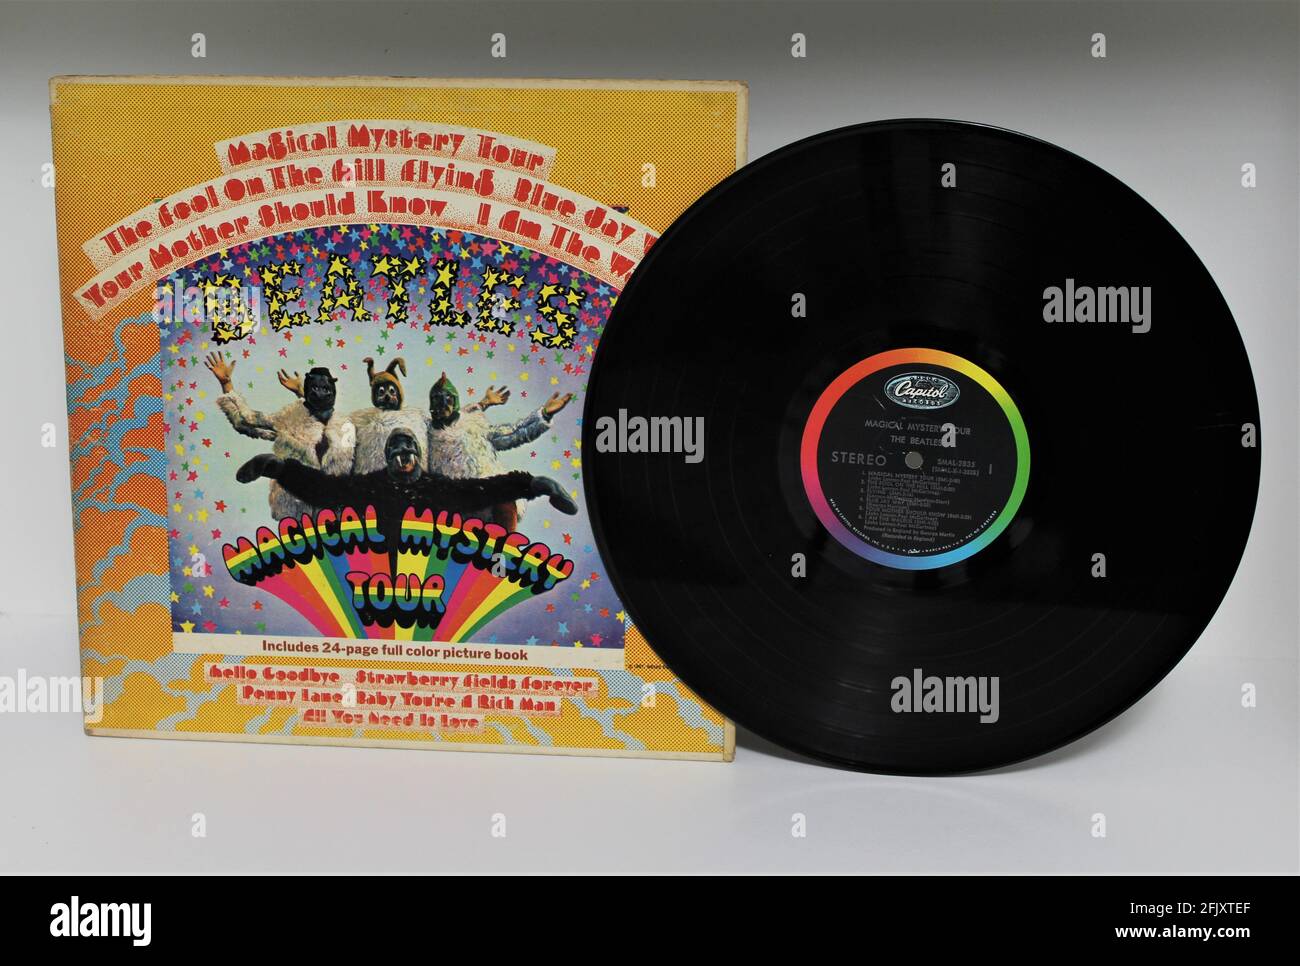 Magical Mystery Tour is a record by the English rock band The Beatles. Music album on vinyl record LP disc. Psychedelic pop music is their main genre. Stock Photo